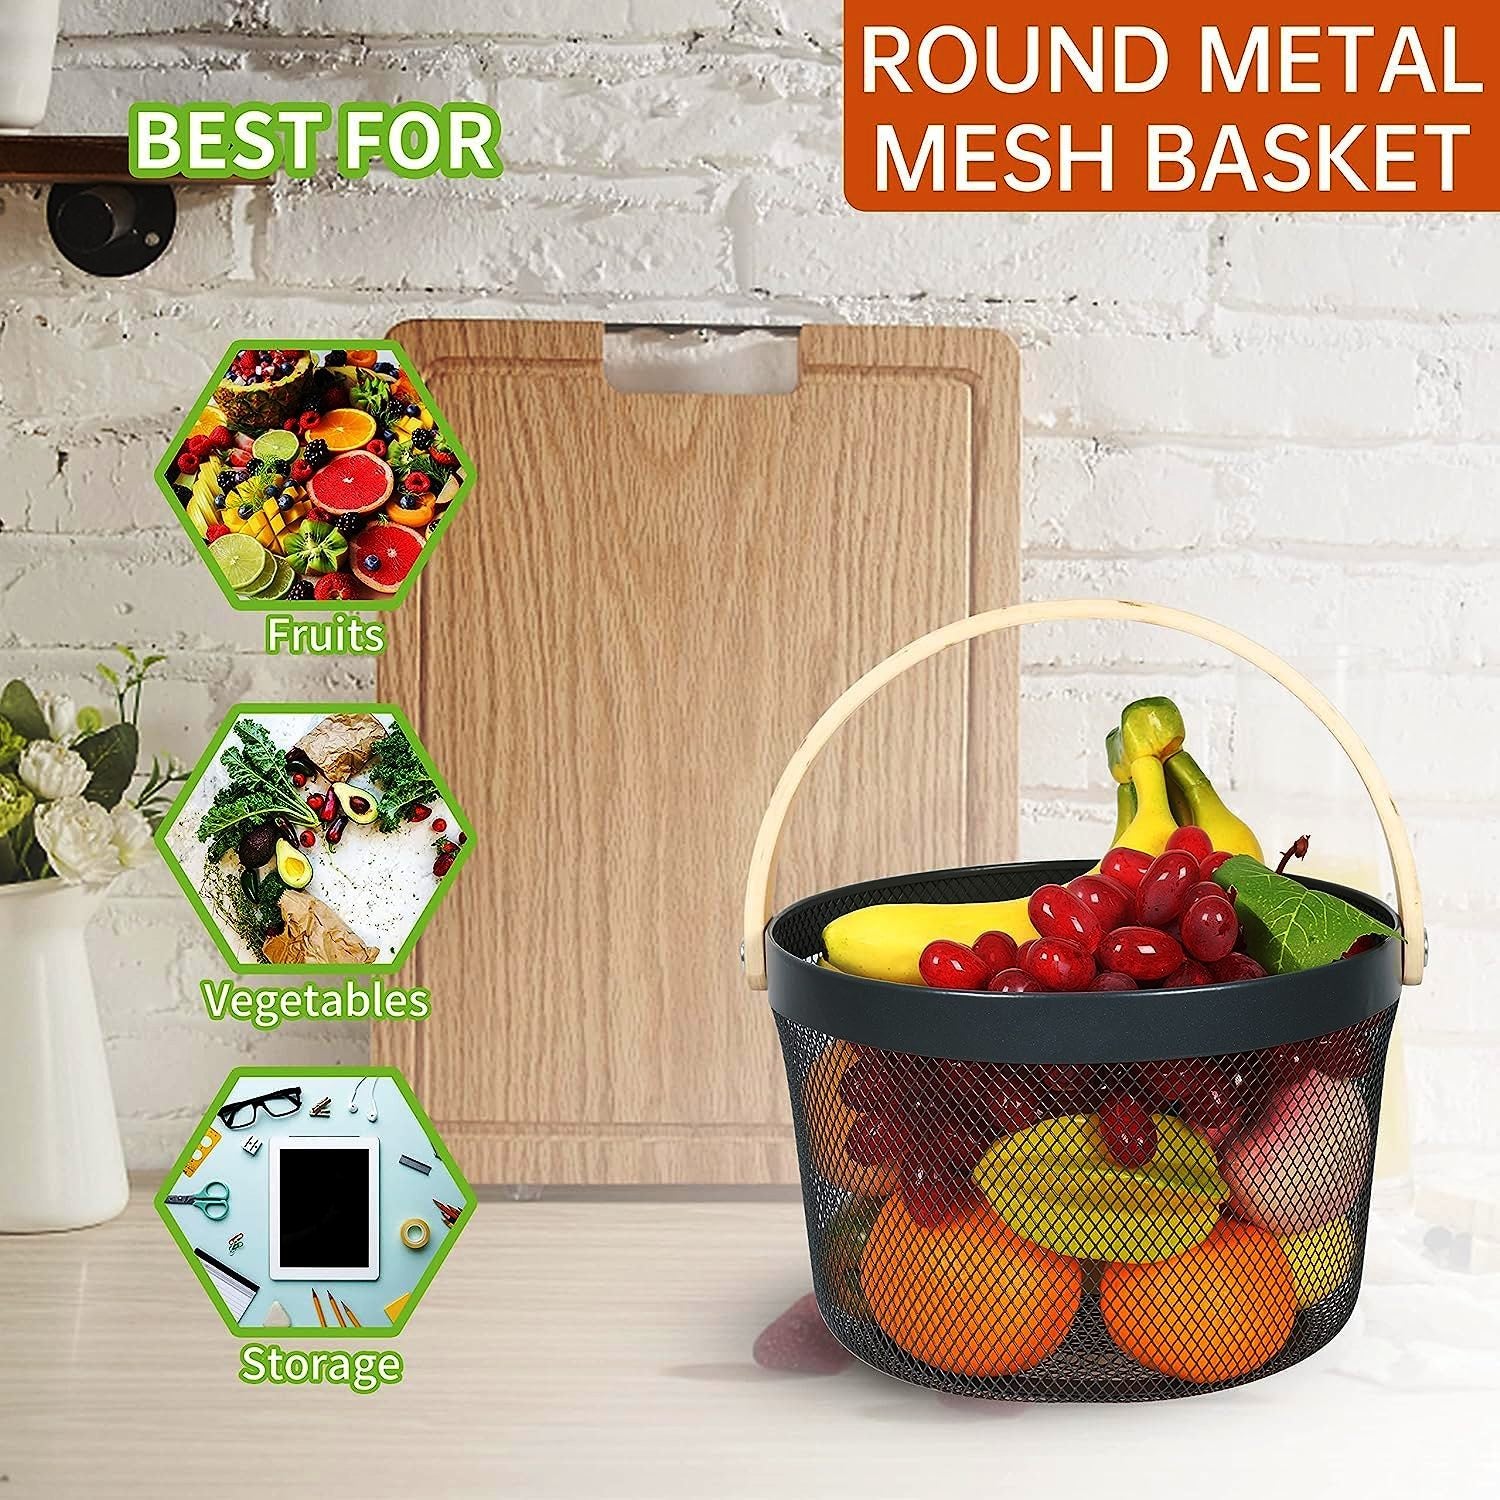 Mesh Steel Basket with Wooden Handle-Round Black Apricot